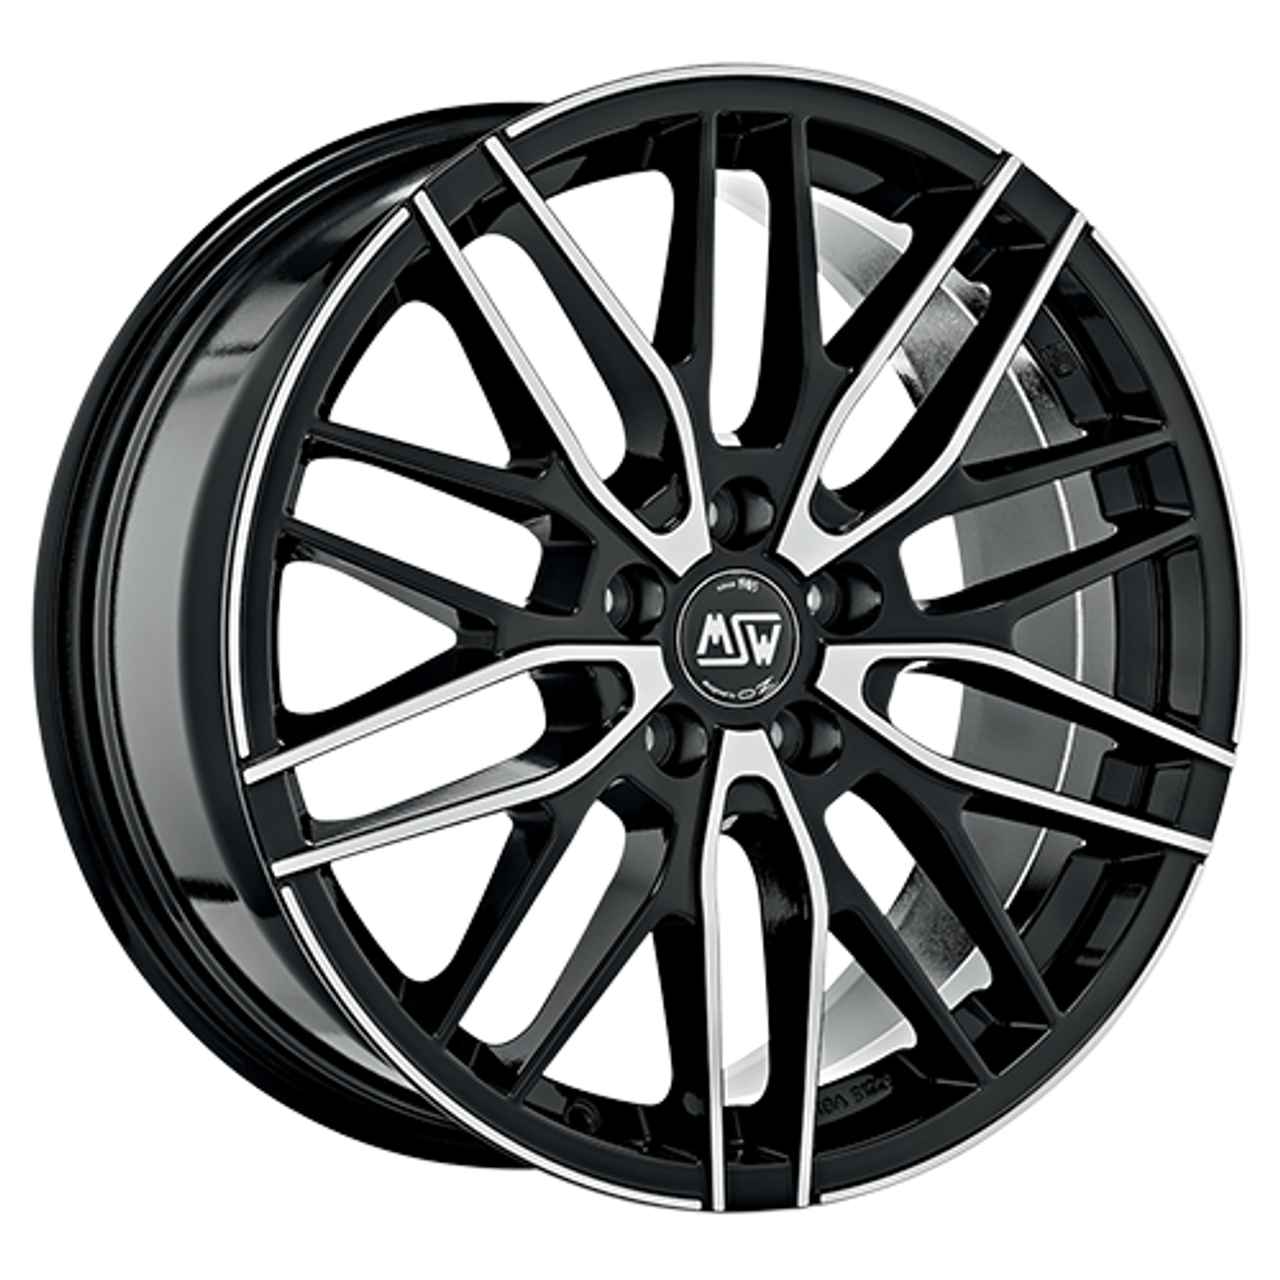 MSW (OZ) MSW 72 gloss black full polished 7.0Jx17 5x114.3 ET40